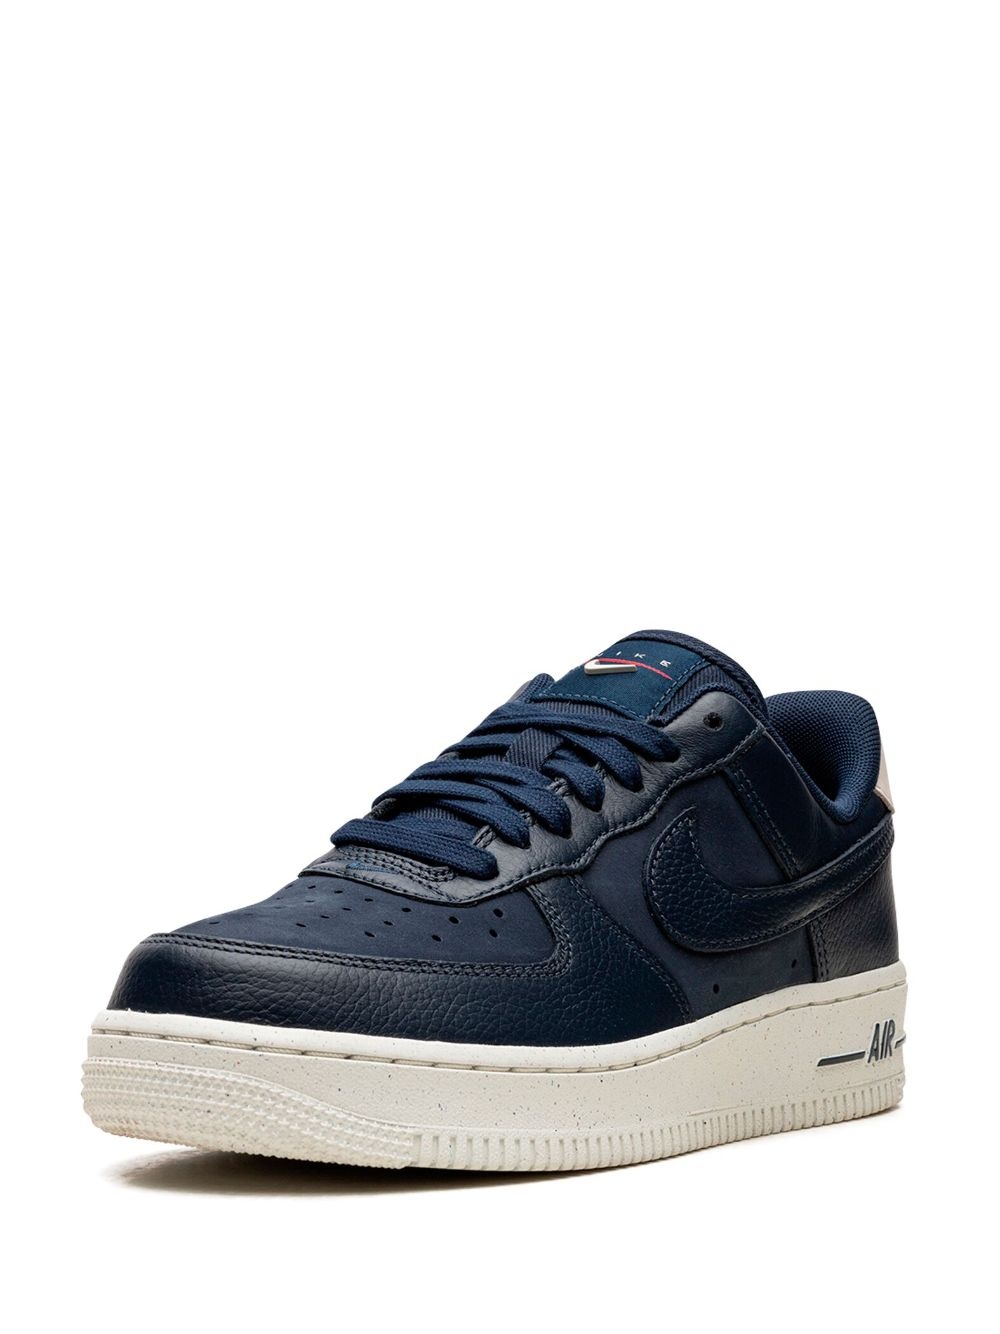 Air Force 1 '07 LX "Obsidian" sneakers - 4